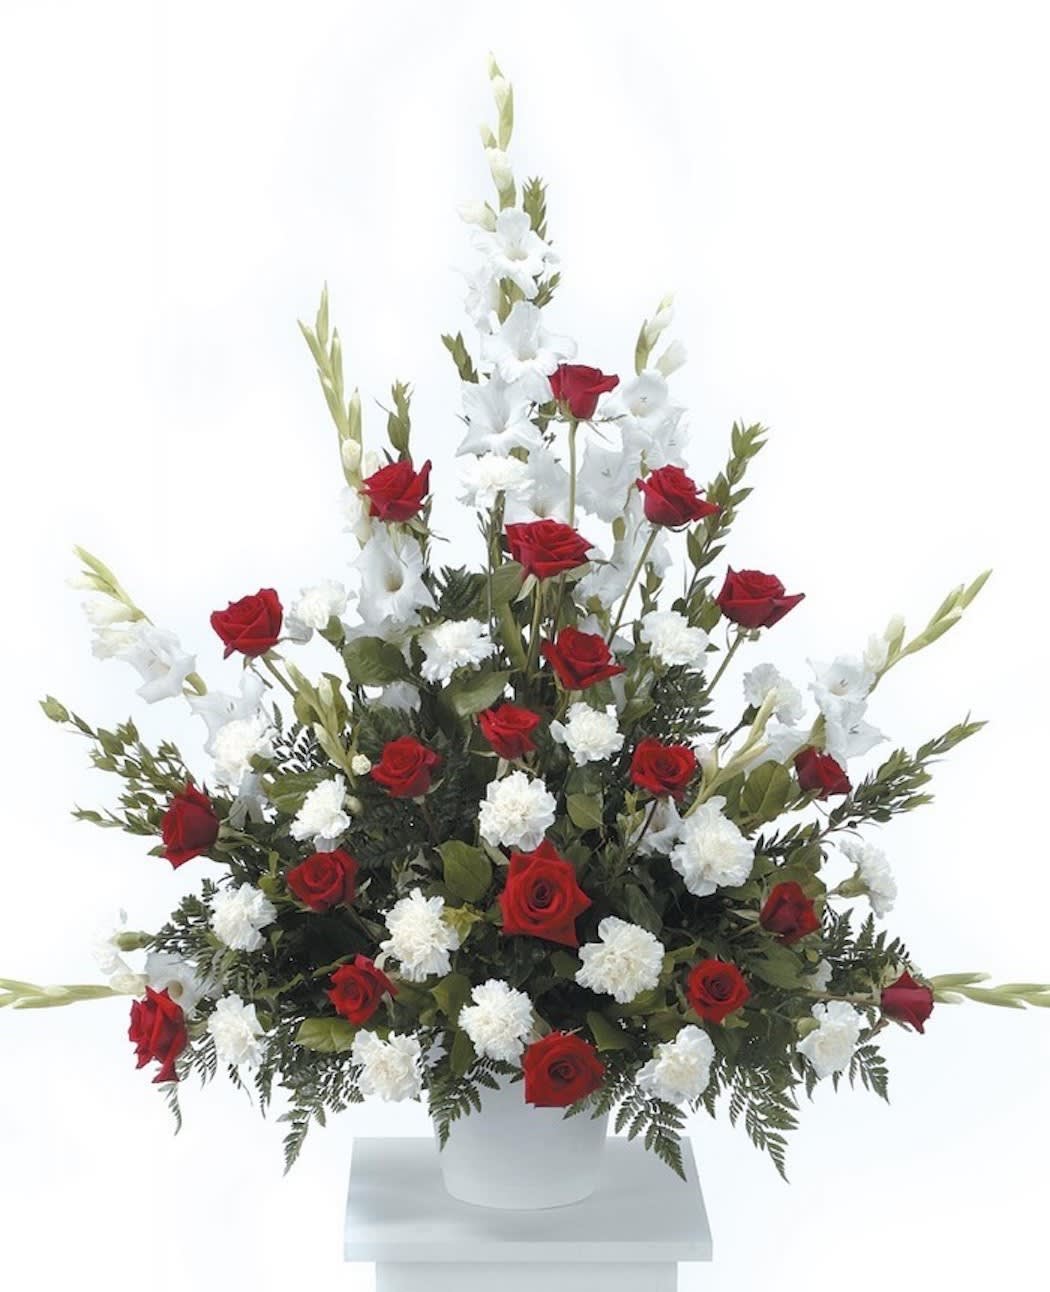 Red &amp; White Sentiment - A beautiful display of red and white to show your condolences for any service. Red rose and white carnations accented with white gladiolus or snapdragons.